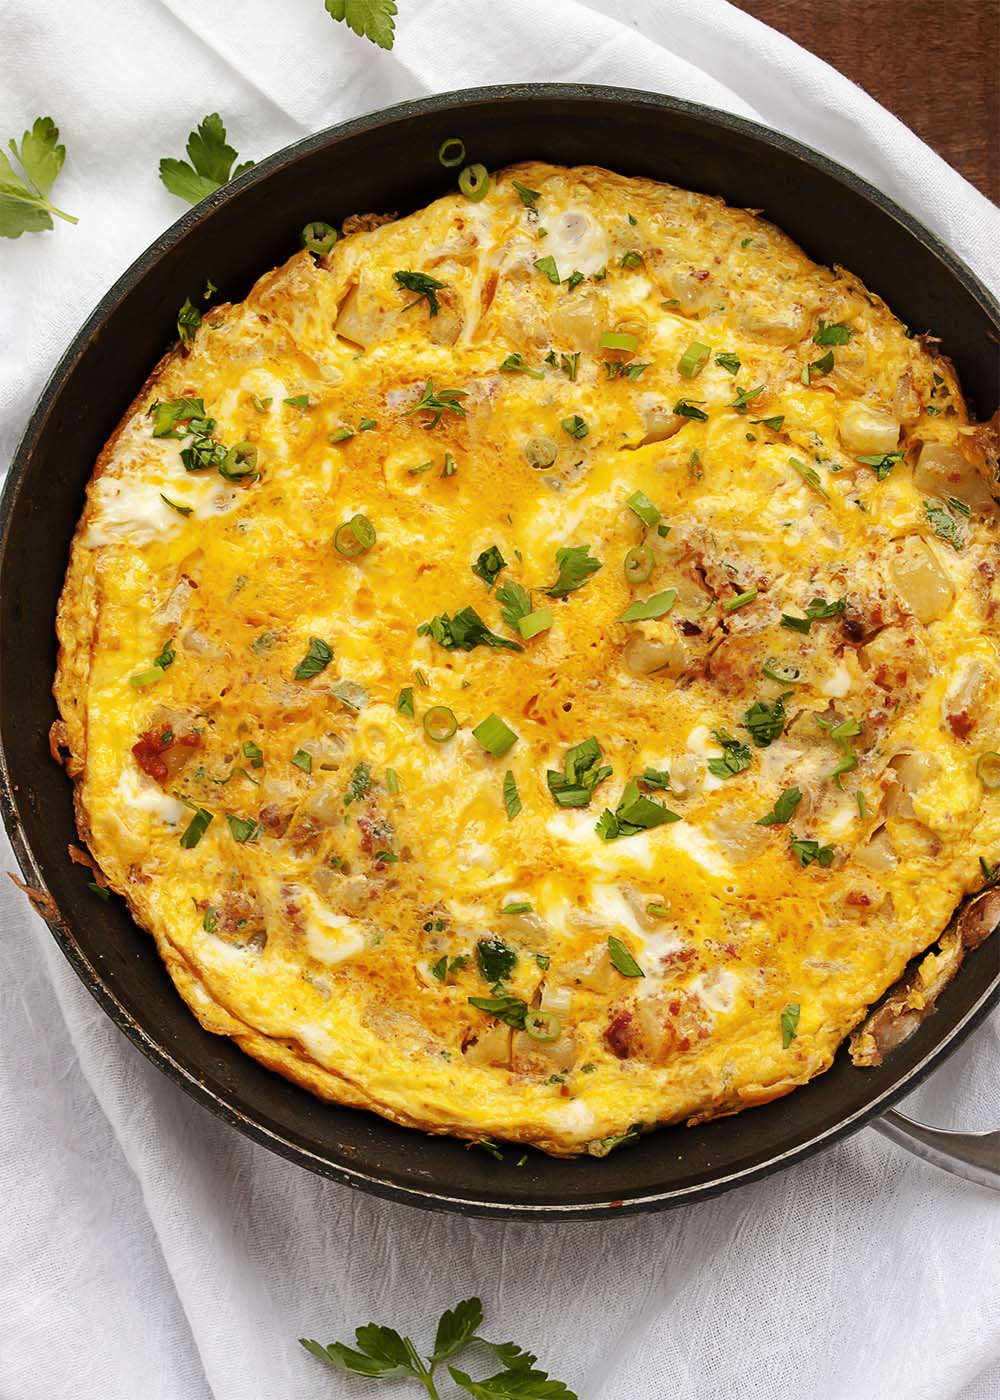 Potato and Chorizo Spanish Tortilla - My Spanish tortilla is full of organic eggs and local chorizo and potatoes. It's bursting with flavor and makes a great lunch or dinner with nice, green salad. | justalittlebitofbacon.com